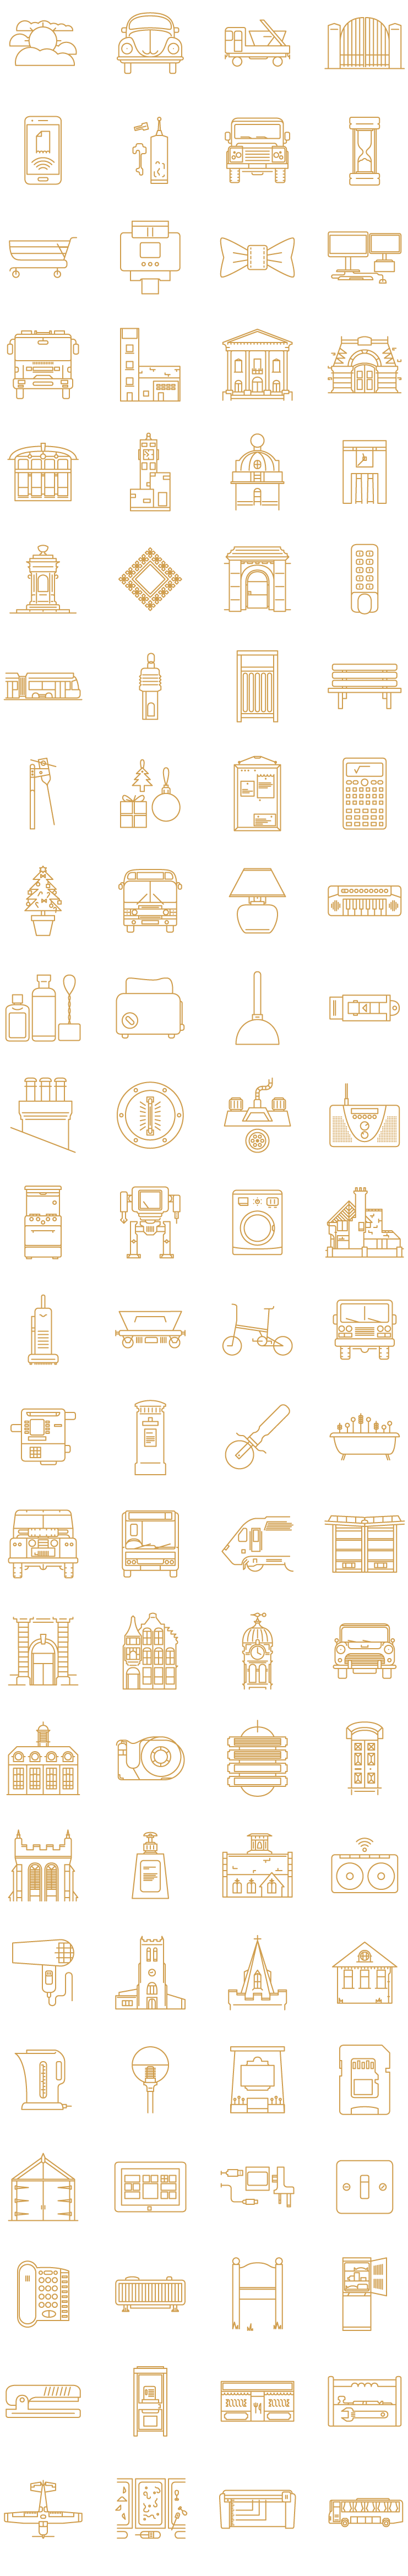 pictogram Icon life daily buildings line lineart